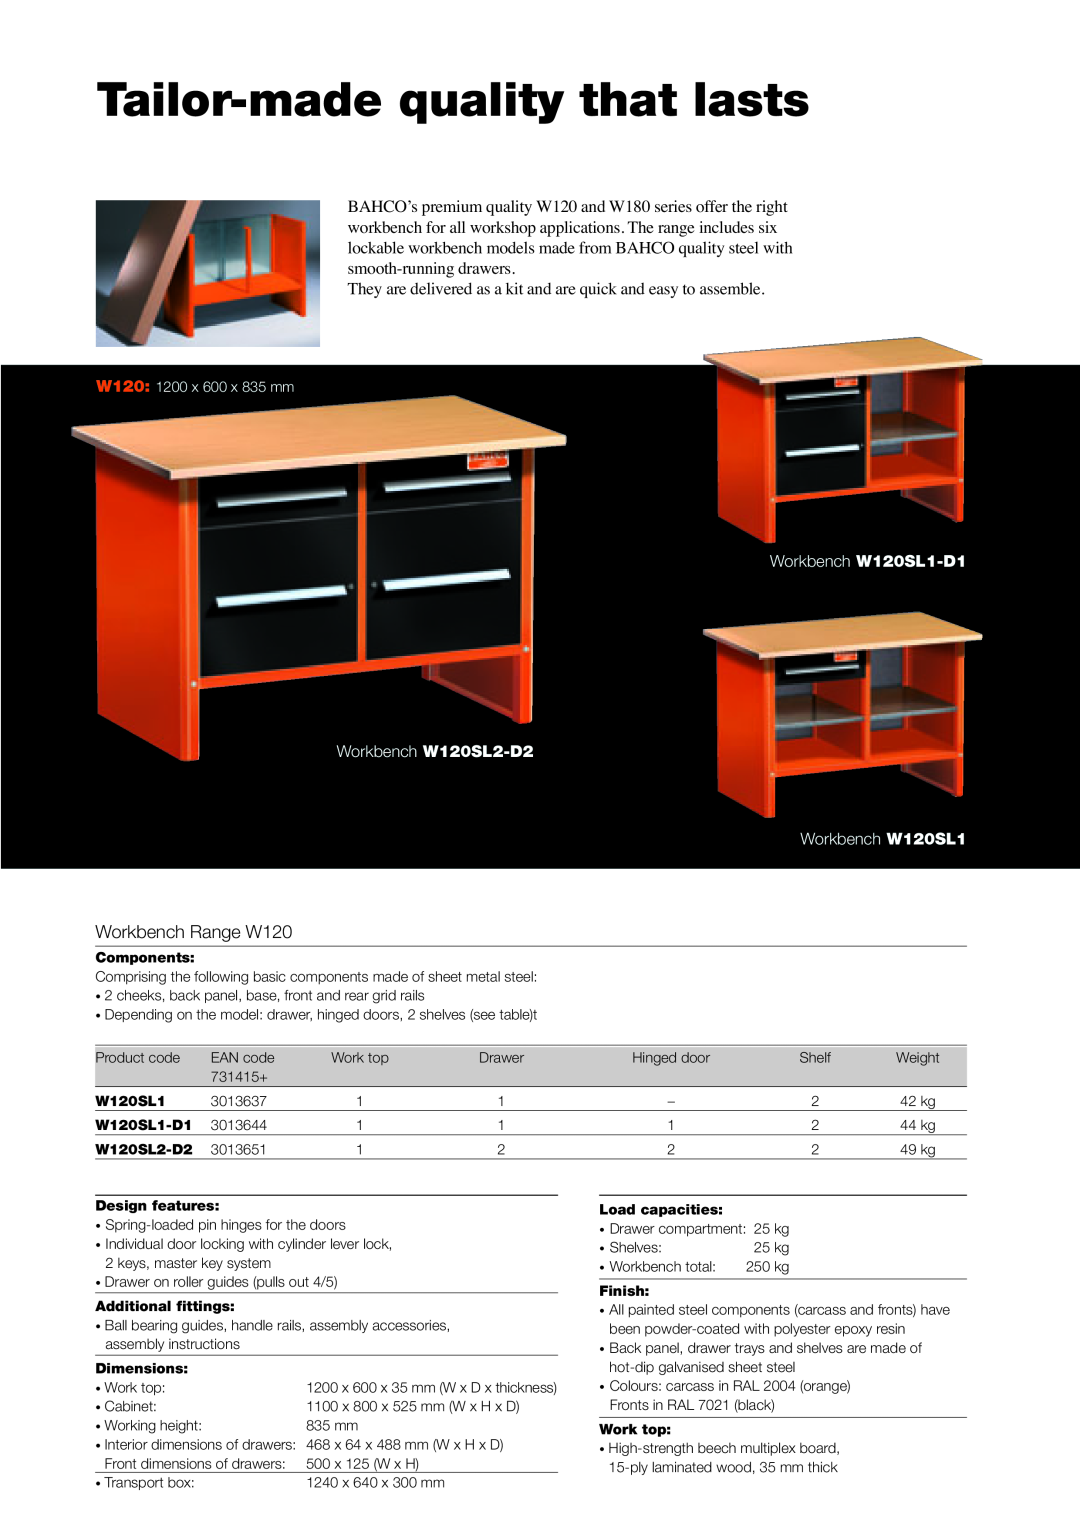 Bahco W180 manual Tailor-madequality that lasts, Workbench Range W120 